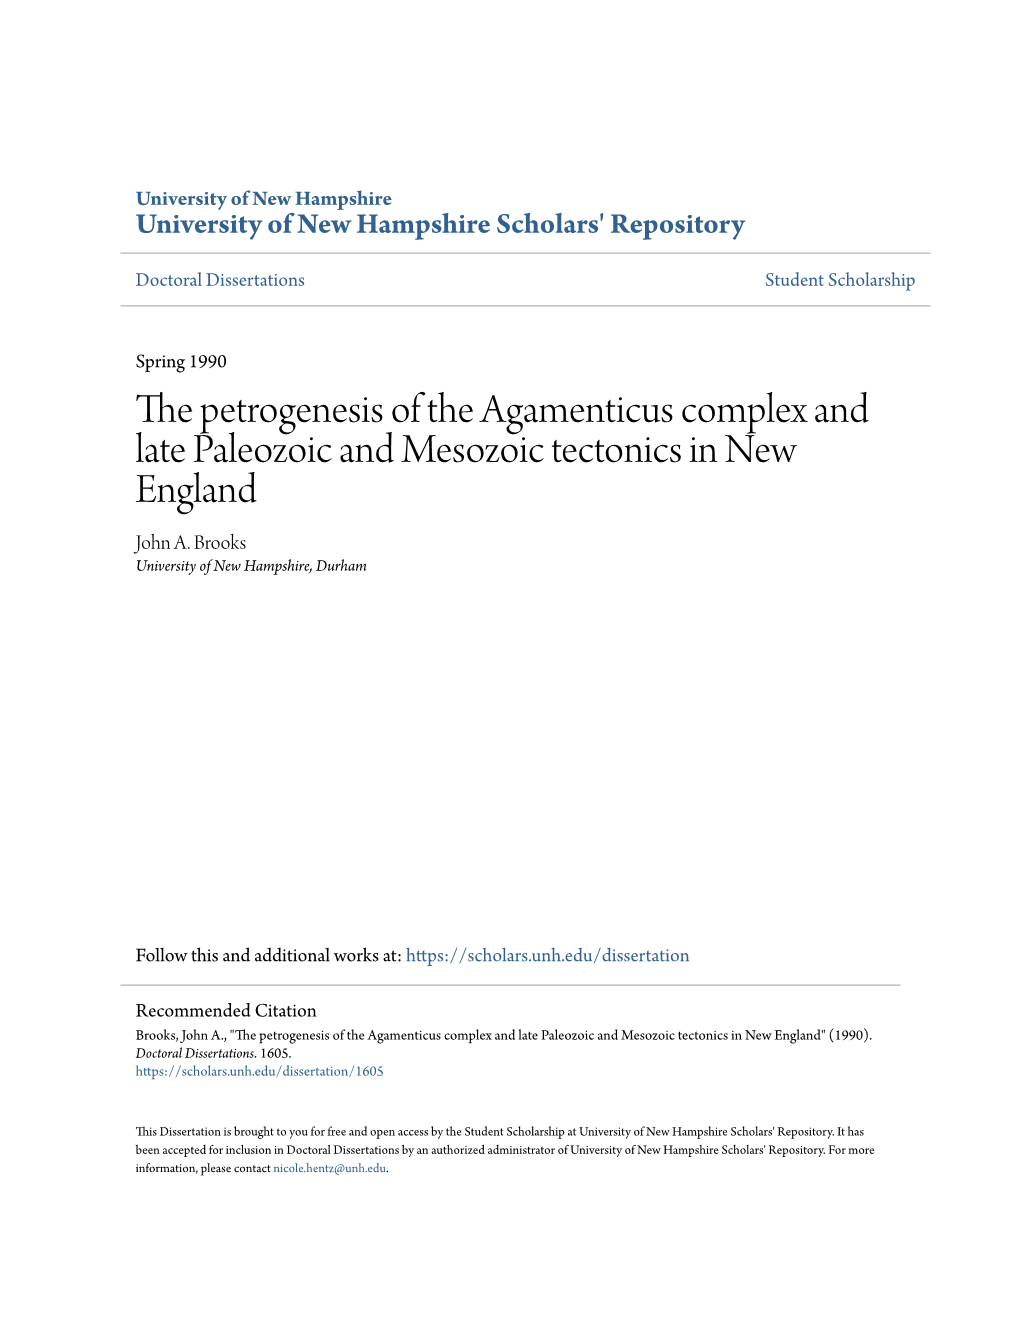 The Petrogenesis of the Agamenticus Complex and Late Paleozoic and Mesozoic Tectonics in New England John A